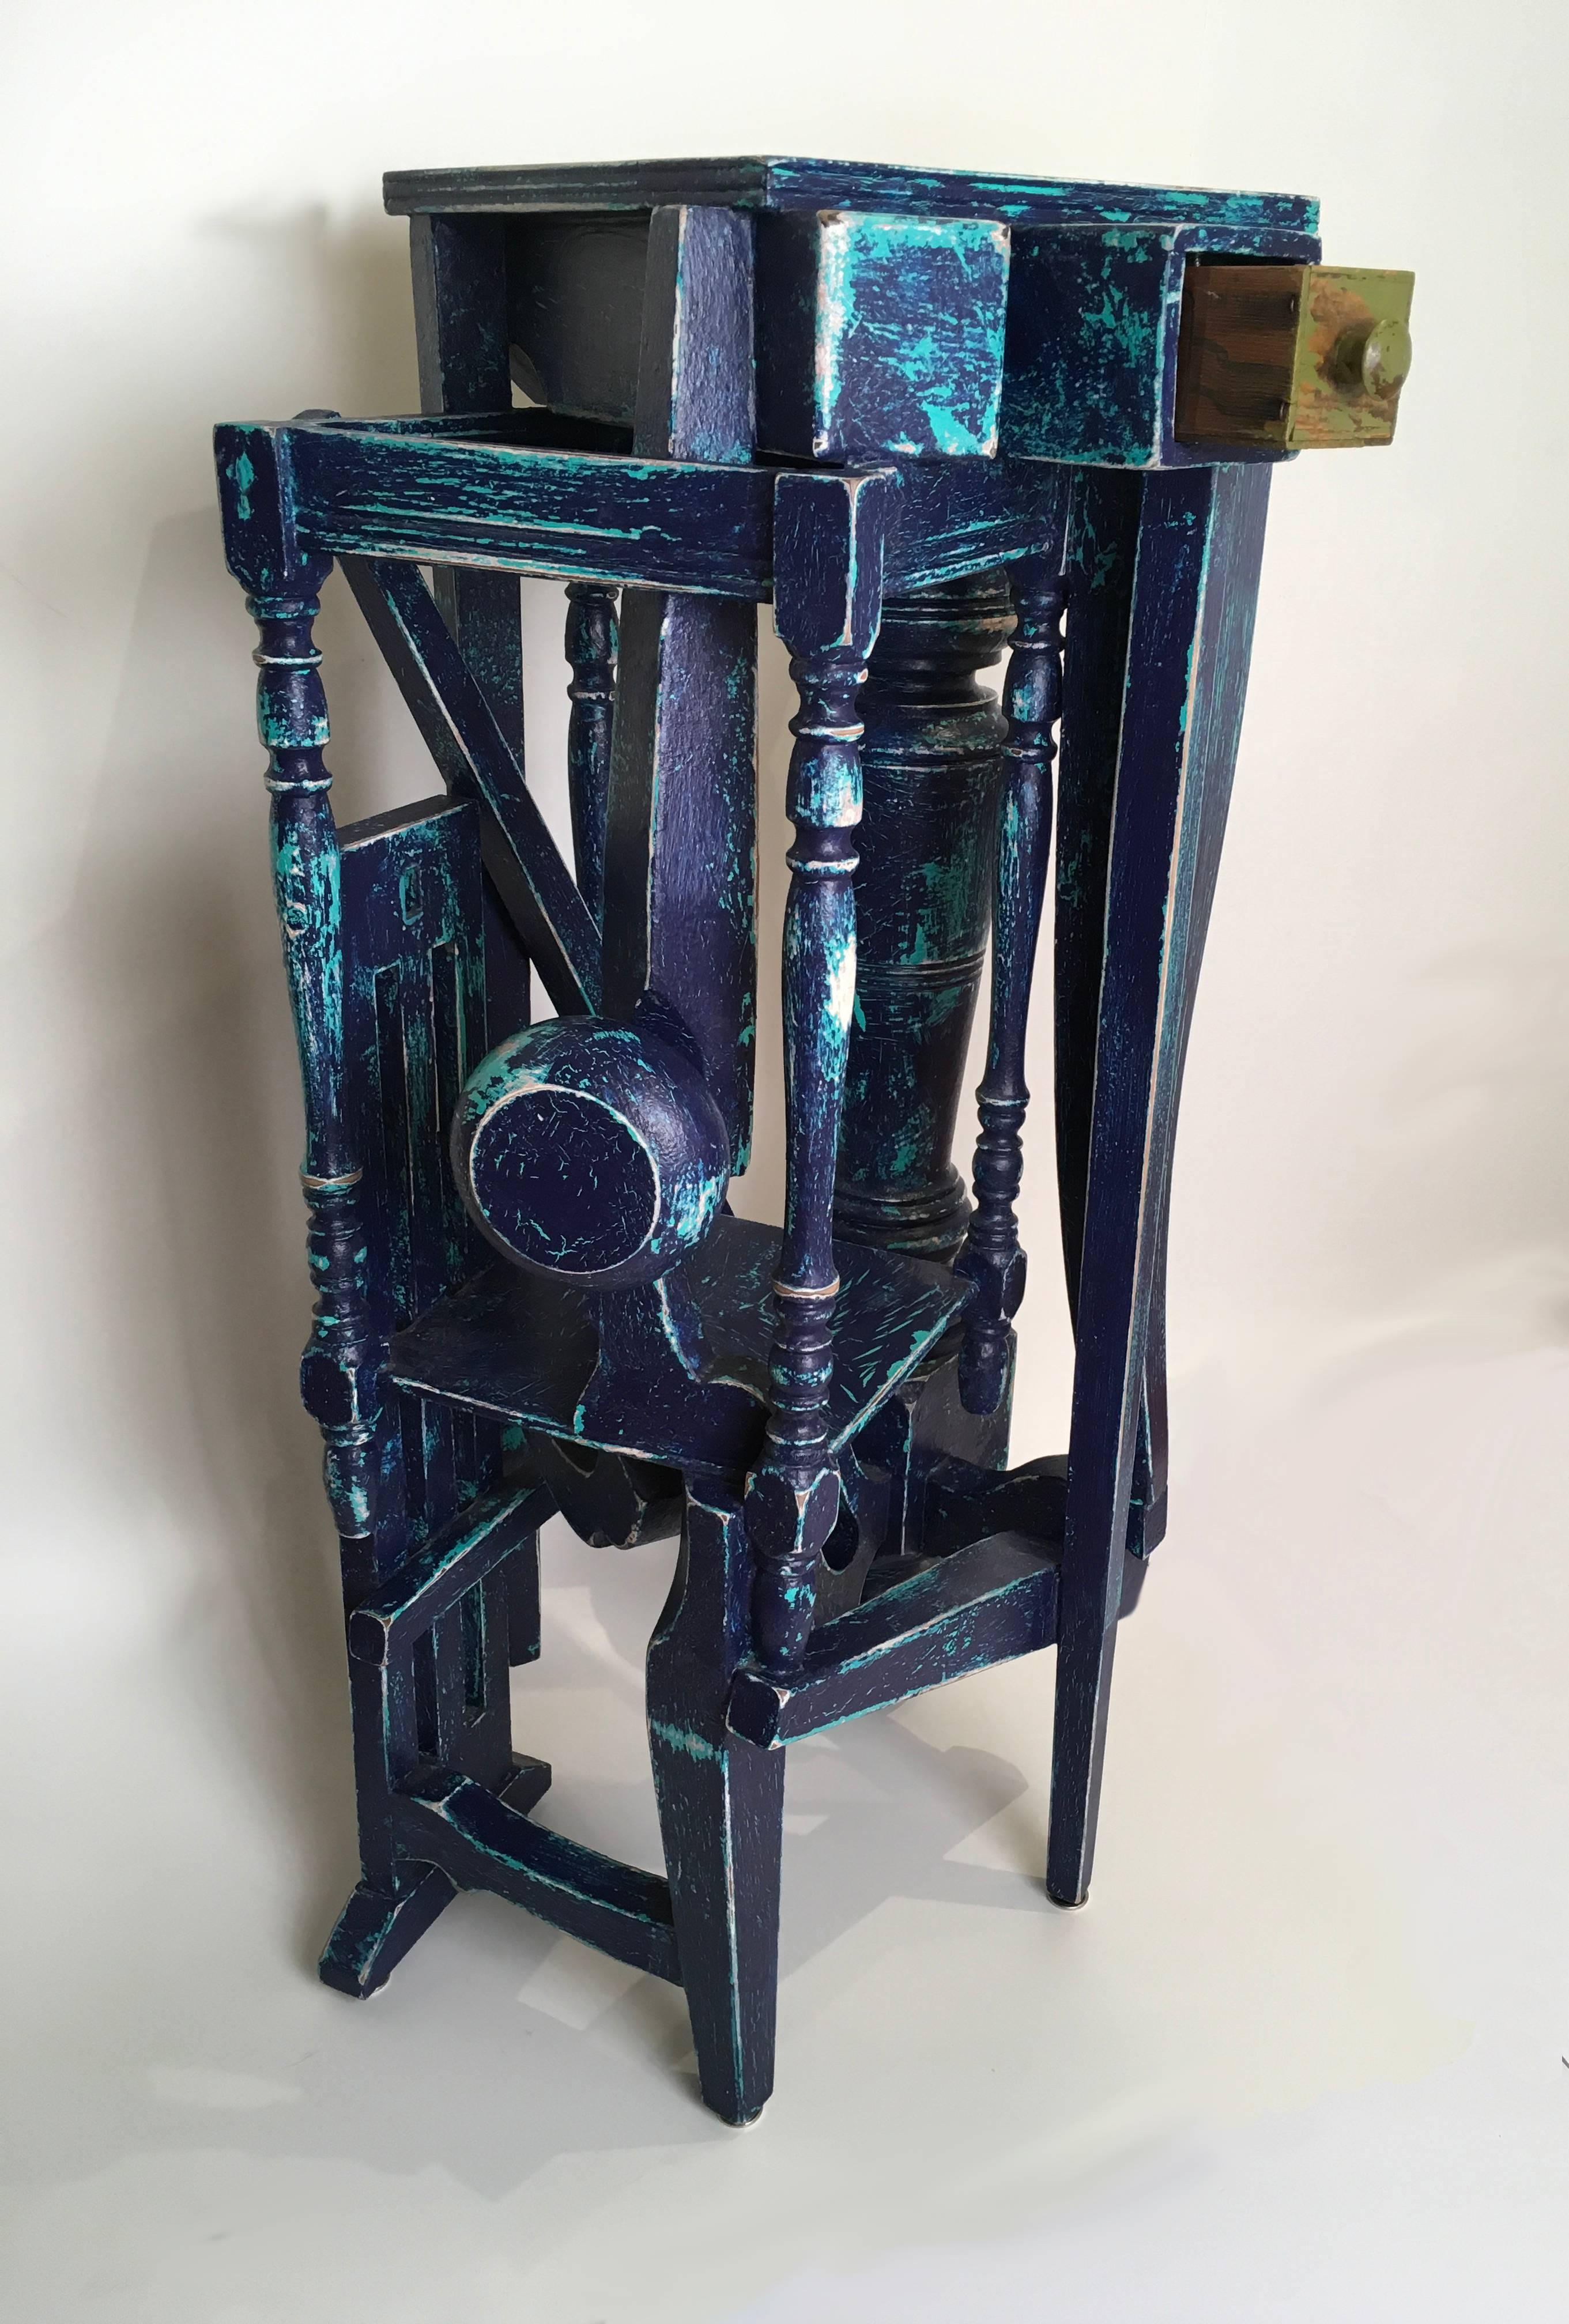 Crash Table 5, Found Object Pedestal Sculpture with Drawer - Mixed Media Art by John Seubert